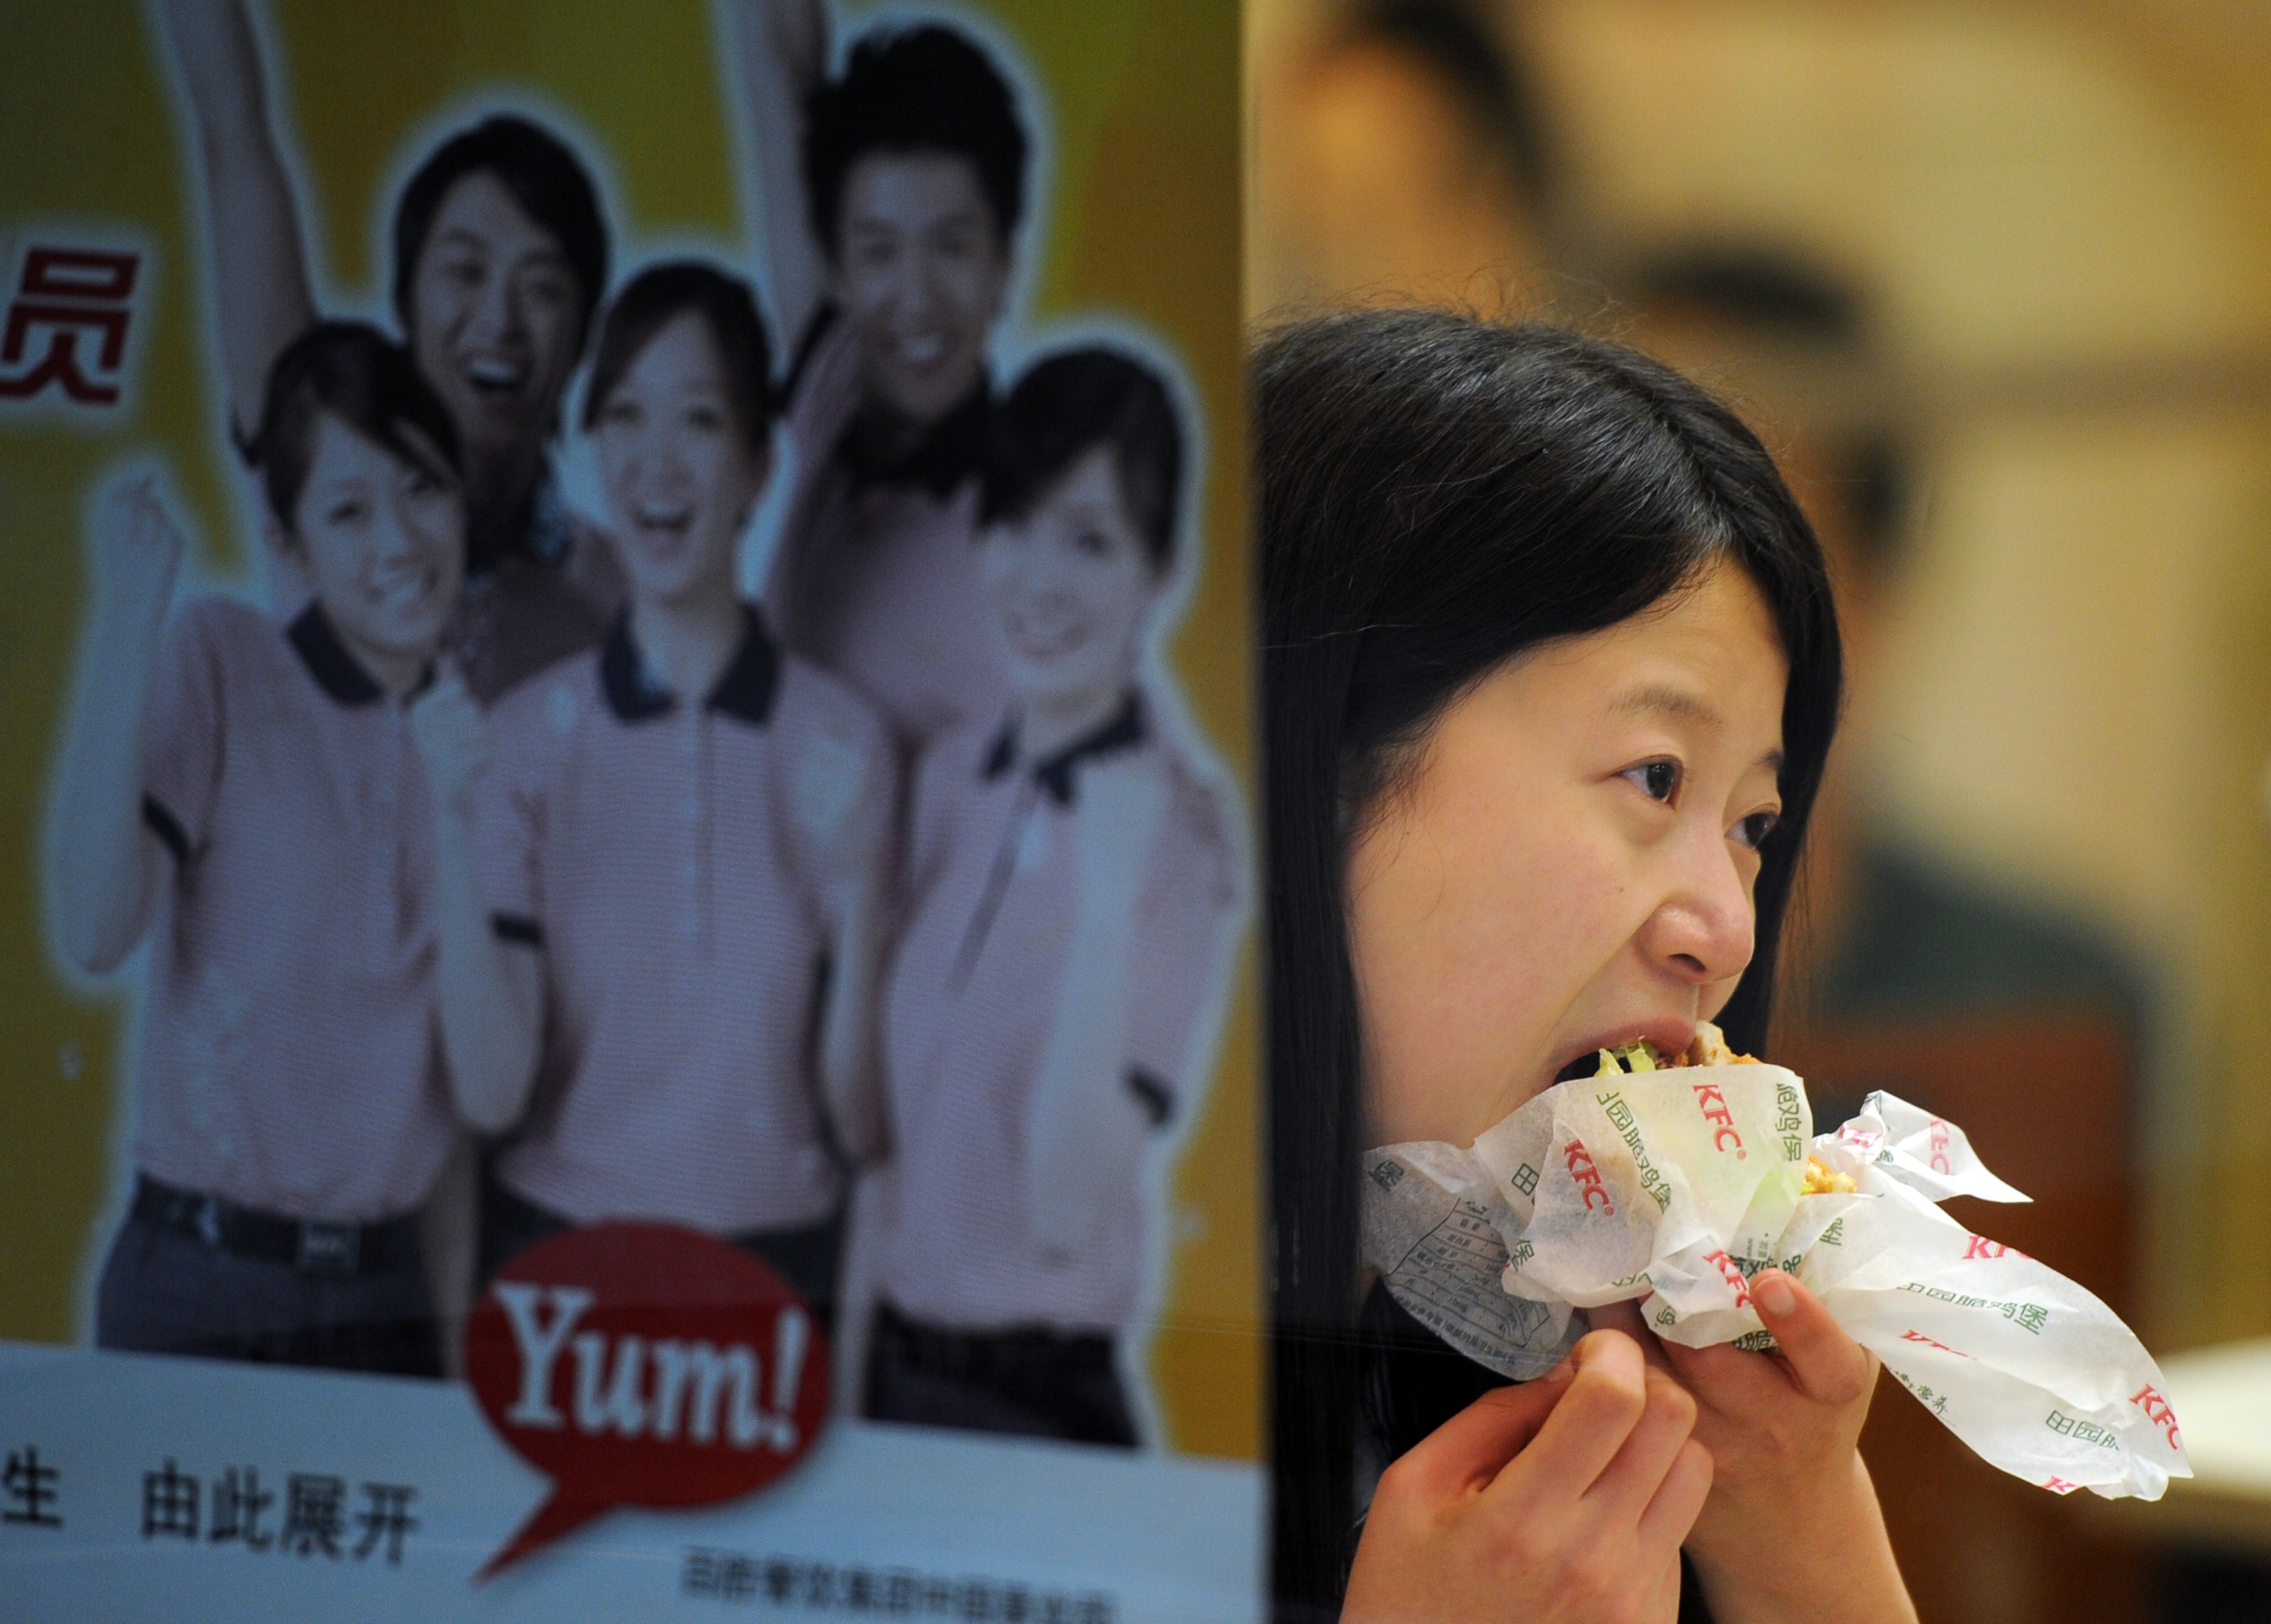 A woman eats a chicken burger in a branch of a KFC restaurant in Shanghai. Yum China Holdings, the operator of KFC and Pizza Hut restaurant chains across the country, is buying a controlling stake in food delivery service provider Daojia. Photo: AFP